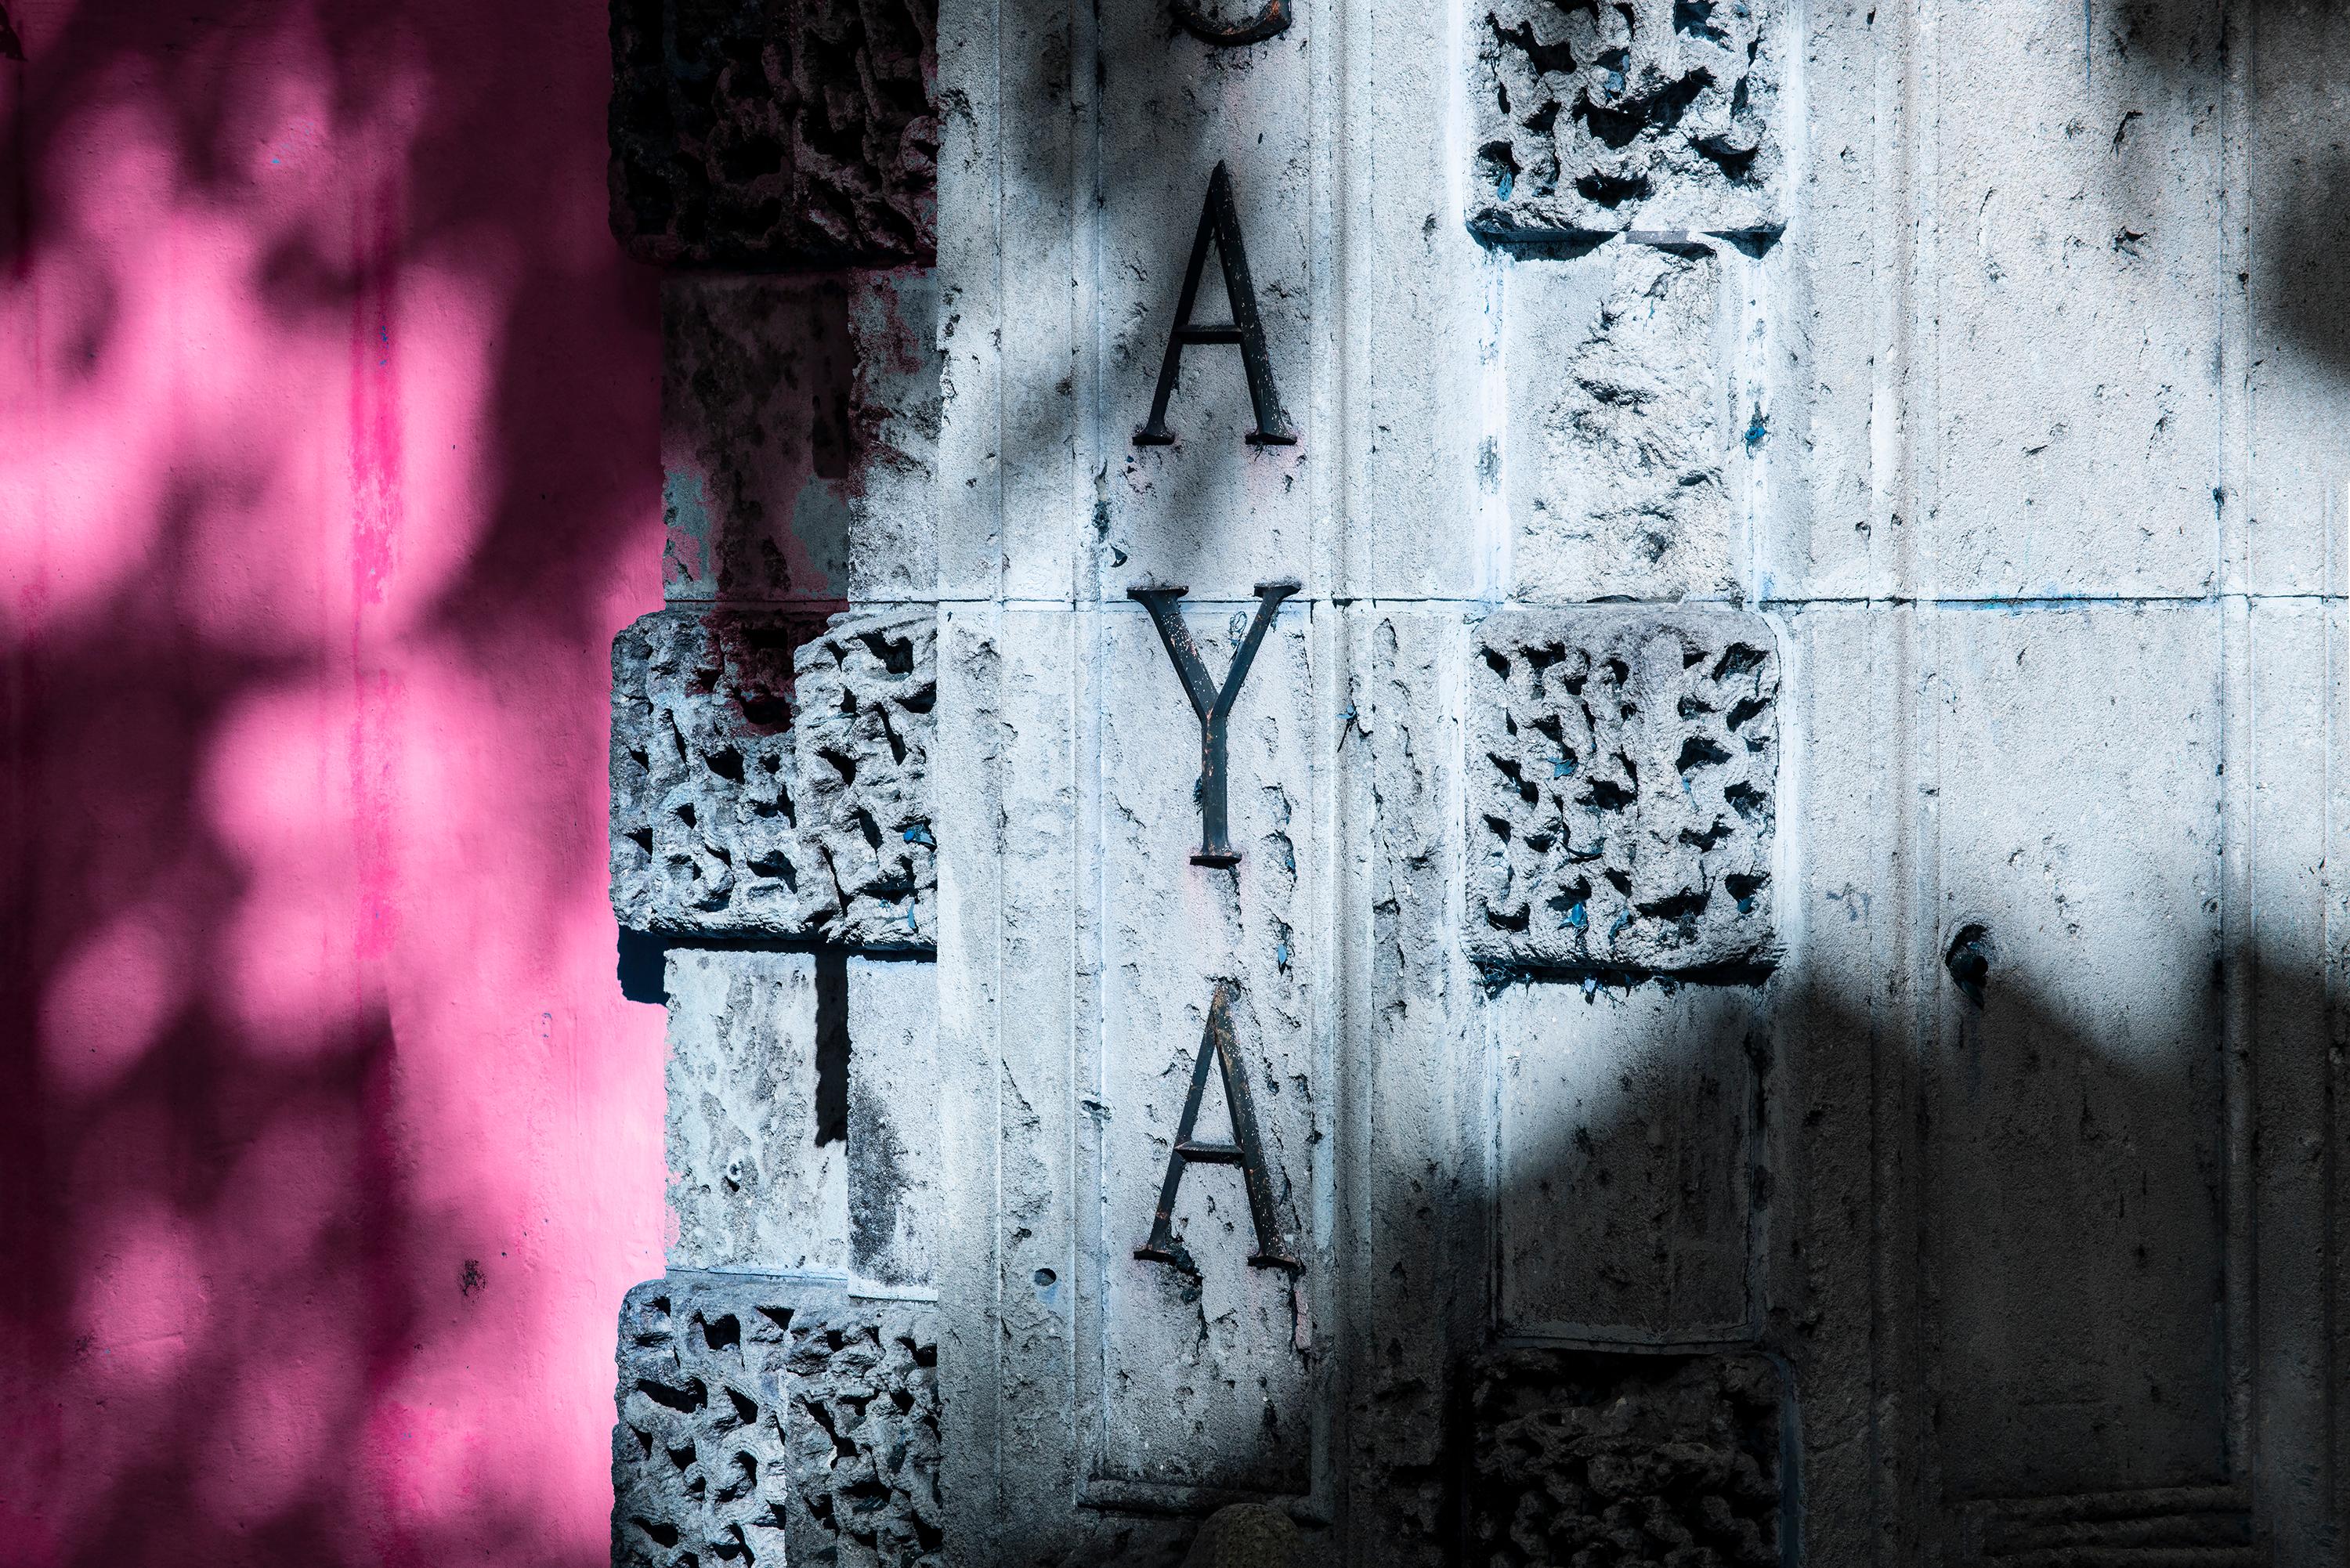 Robert Funk Abstract Photograph - Vizcaya Gray and Pink Facade - Neutral Monochromatic Colors